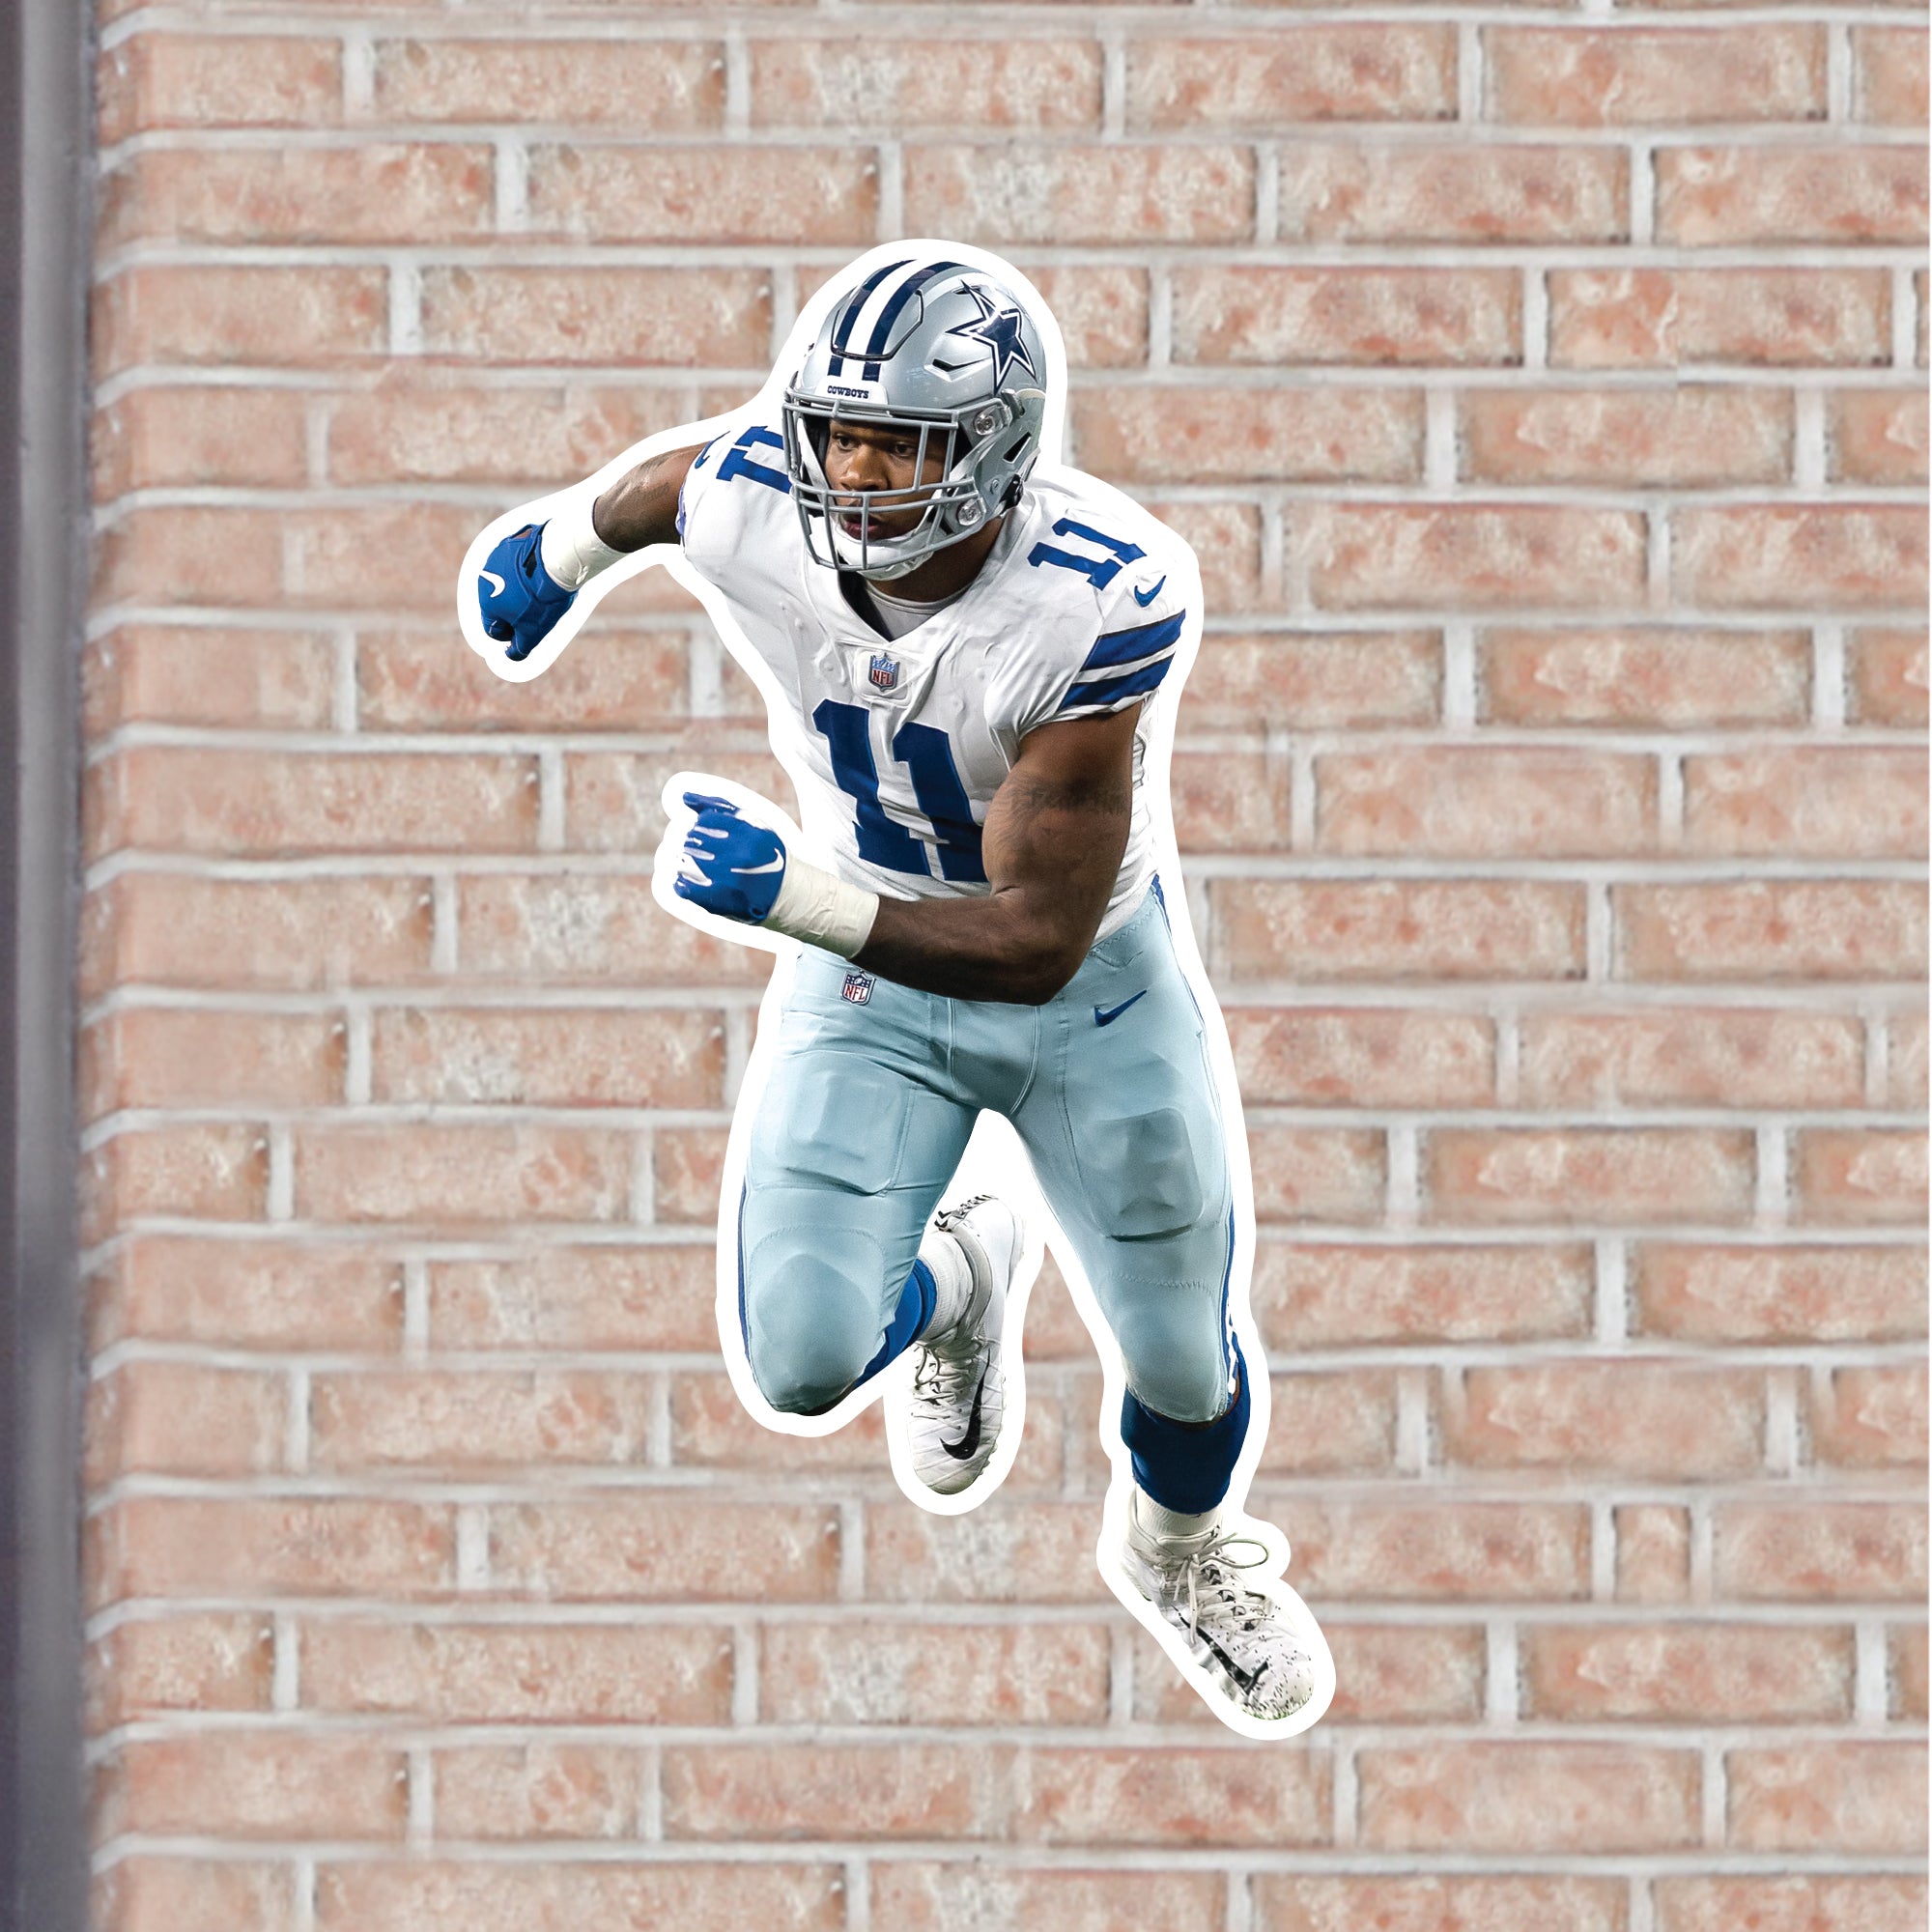 Wallpaper Wednesday for iPhones  rcowboys